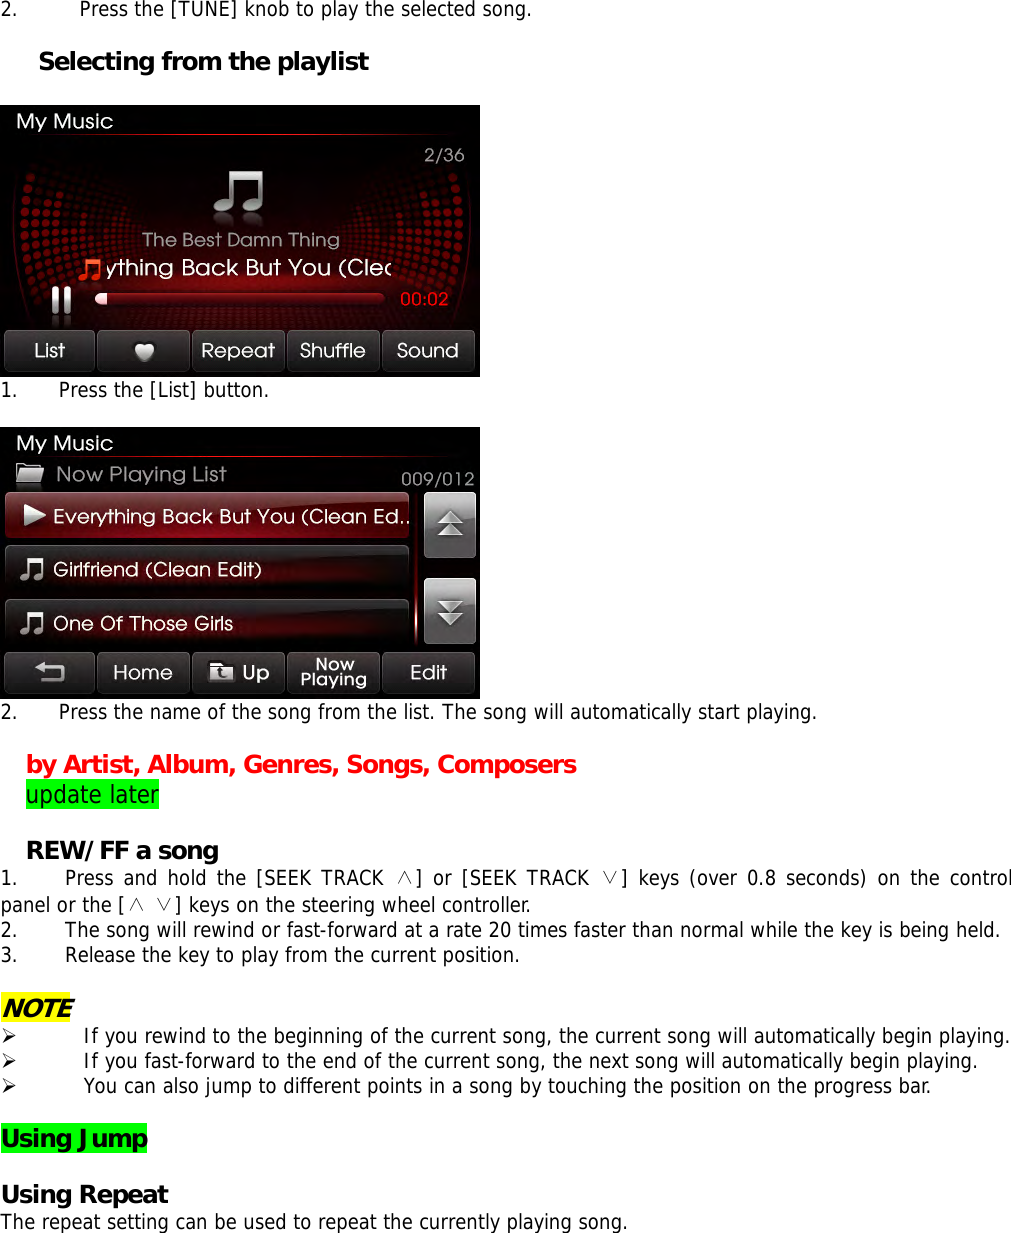 2. Press the [TUNE] knob to play the selected song.    Selecting from the playlist   1. Press the [List] button.   2. Press the name of the song from the list. The song will automatically start playing.  by Artist, Album, Genres, Songs, Composers update later  REW/FF a song 1. Press and hold the [SEEK TRACK ∧] or [SEEK TRACK ∨] keys (over 0.8 seconds) on the control panel or the [   ] keys on the steering wheel controller.∧∨  2. The song will rewind or fast-forward at a rate 20 times faster than normal while the key is being held.  3. Release the key to play from the current position.  NOTE ¾ If you rewind to the beginning of the current song, the current song will automatically begin playing.  ¾ If you fast-forward to the end of the current song, the next song will automatically begin playing. ¾ You can also jump to different points in a song by touching the position on the progress bar.   Using Jump  Using Repeat The repeat setting can be used to repeat the currently playing song. 